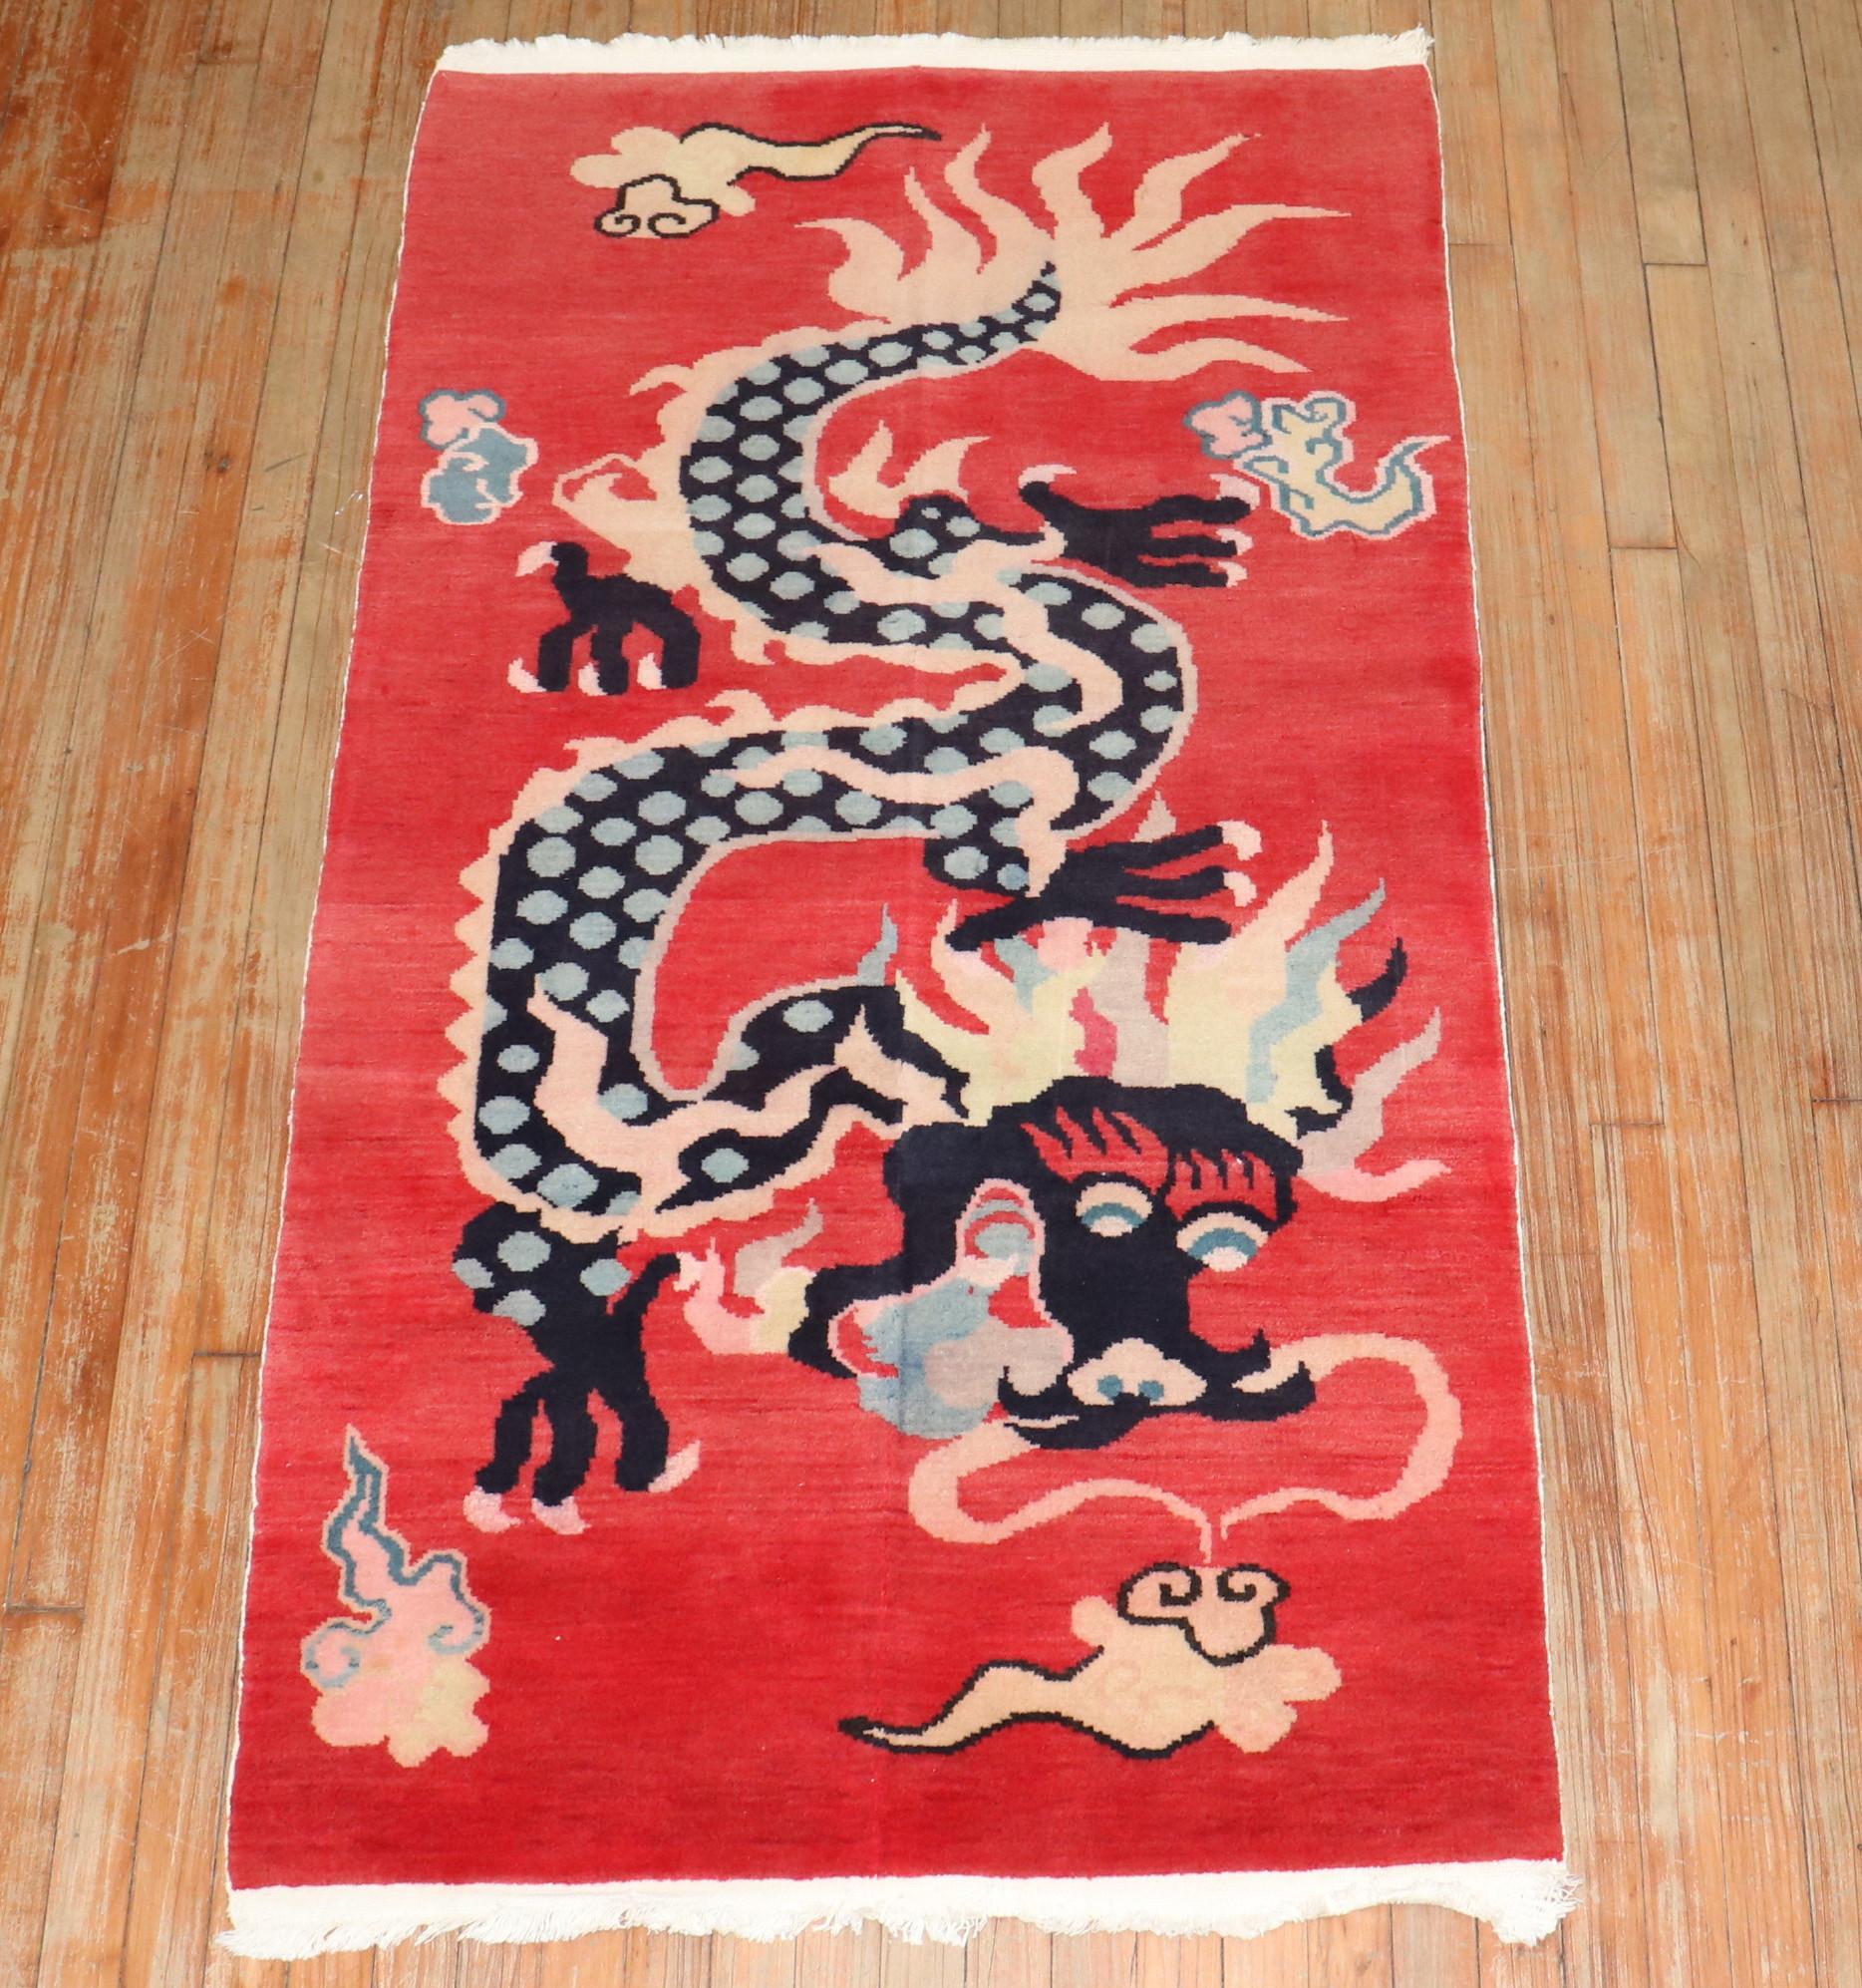 A colorful one-of-a-kind Tibetan rug from the 3rd quarter of the 20th century with a dragon motif on red ground

Measures: 3' x 5'7''.